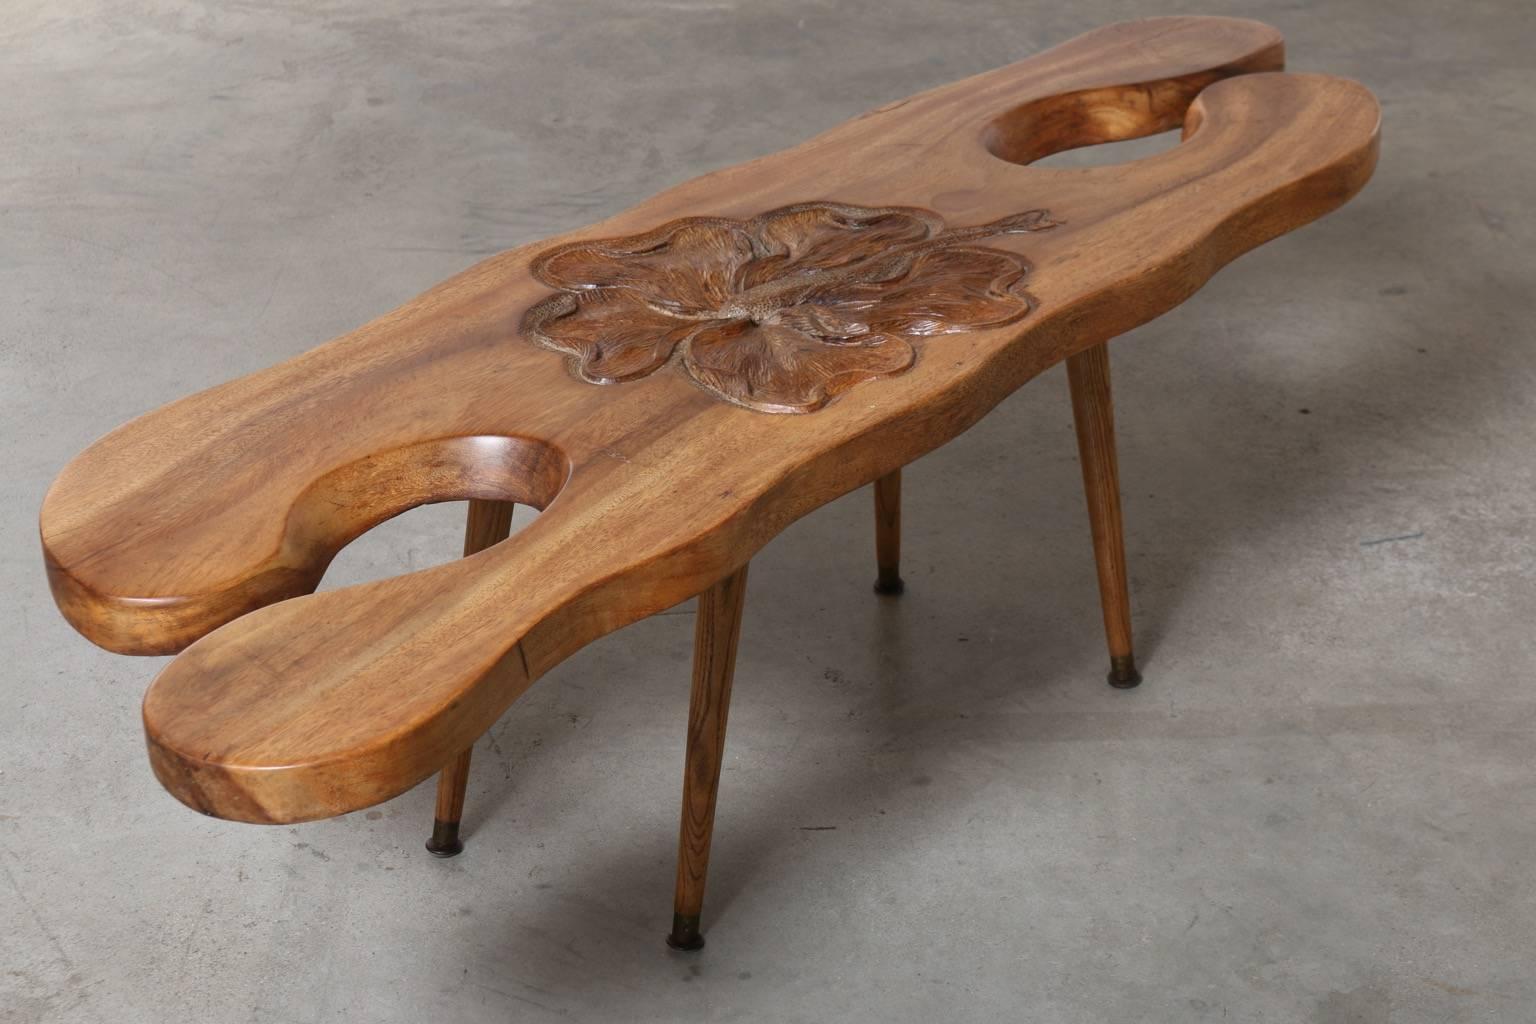 Hawaiian Wood Coffee Table with Hibiscus Flower Carving, circa 1940 
This coffee table features a solid, 2 inch thick, wooden top with stunning grain pattern and a large, intricate hibiscus flower carving in the center. The H shape of the table adds